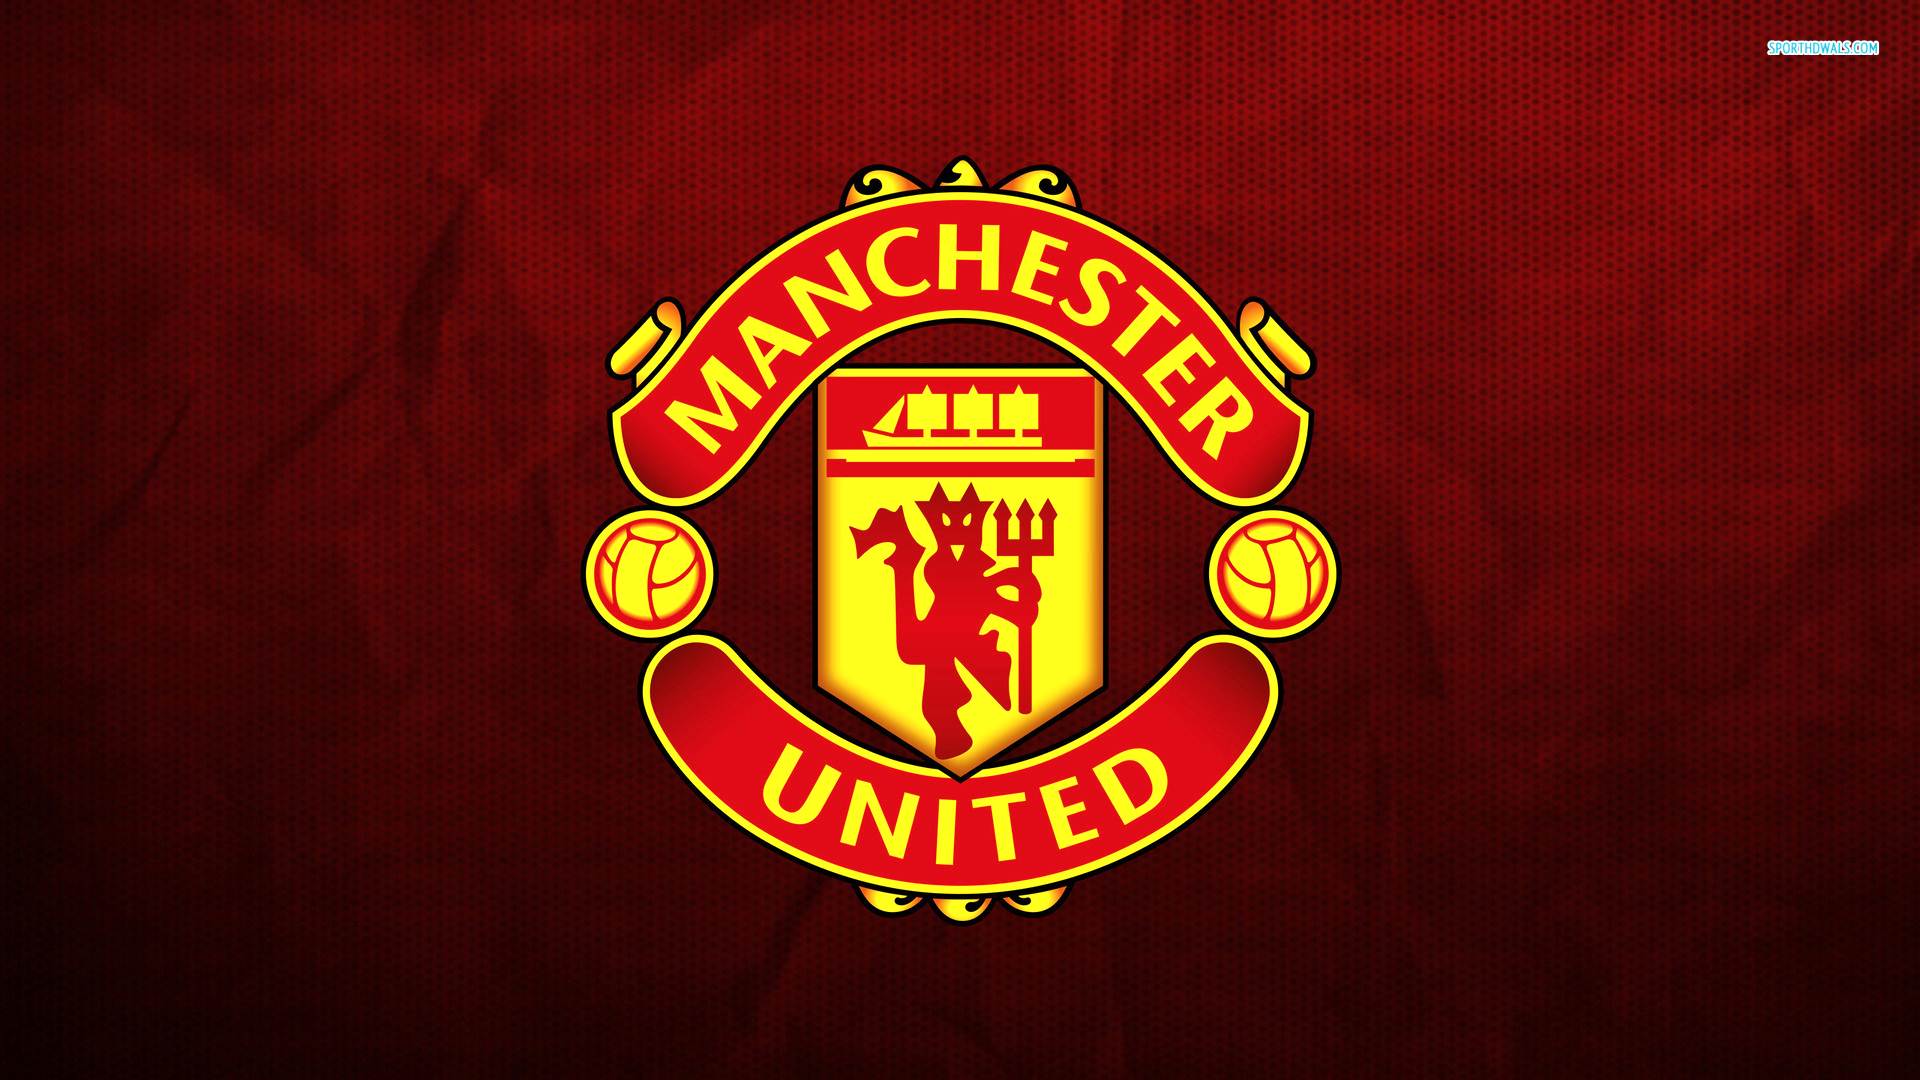 Manchester United Iphone Wallpaper - Manchester United Wallpaper 2016 - HD Wallpaper 